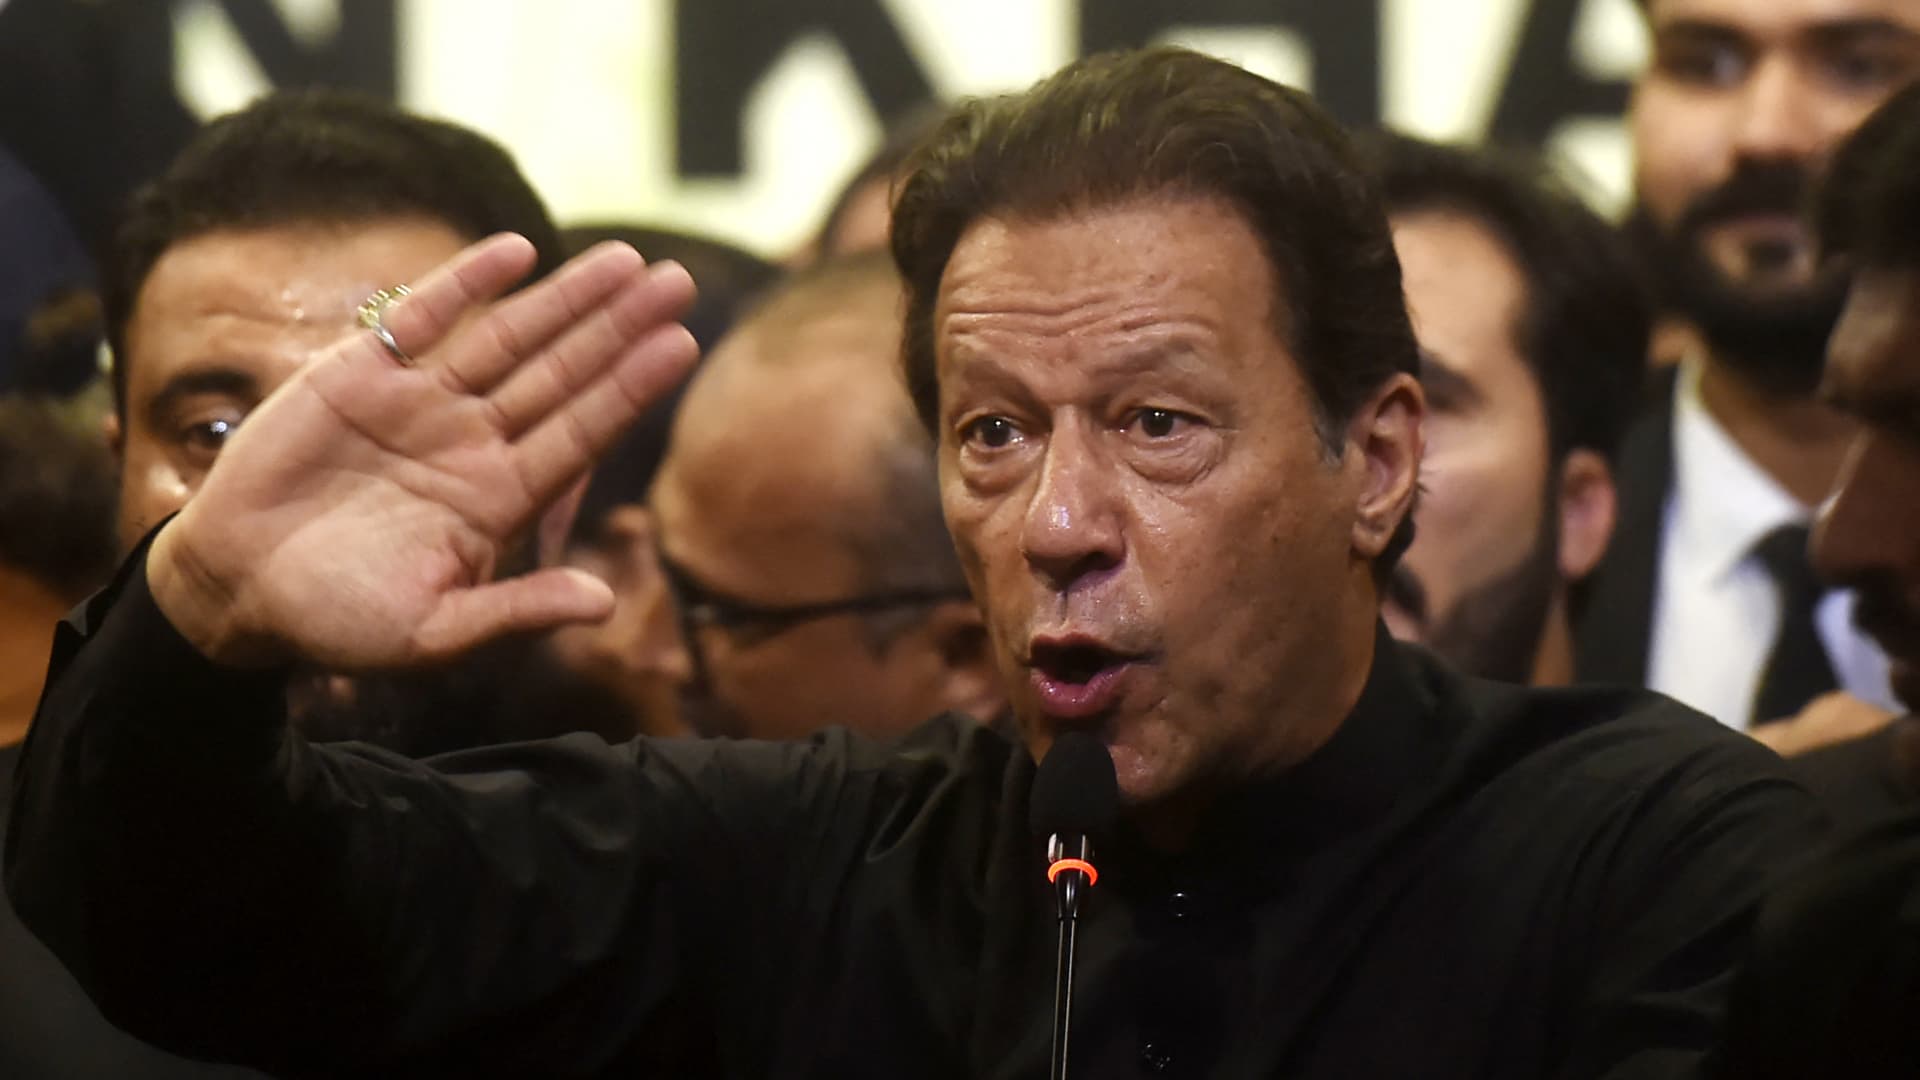 Pakistan election commission bars former PM Khan from holding public office